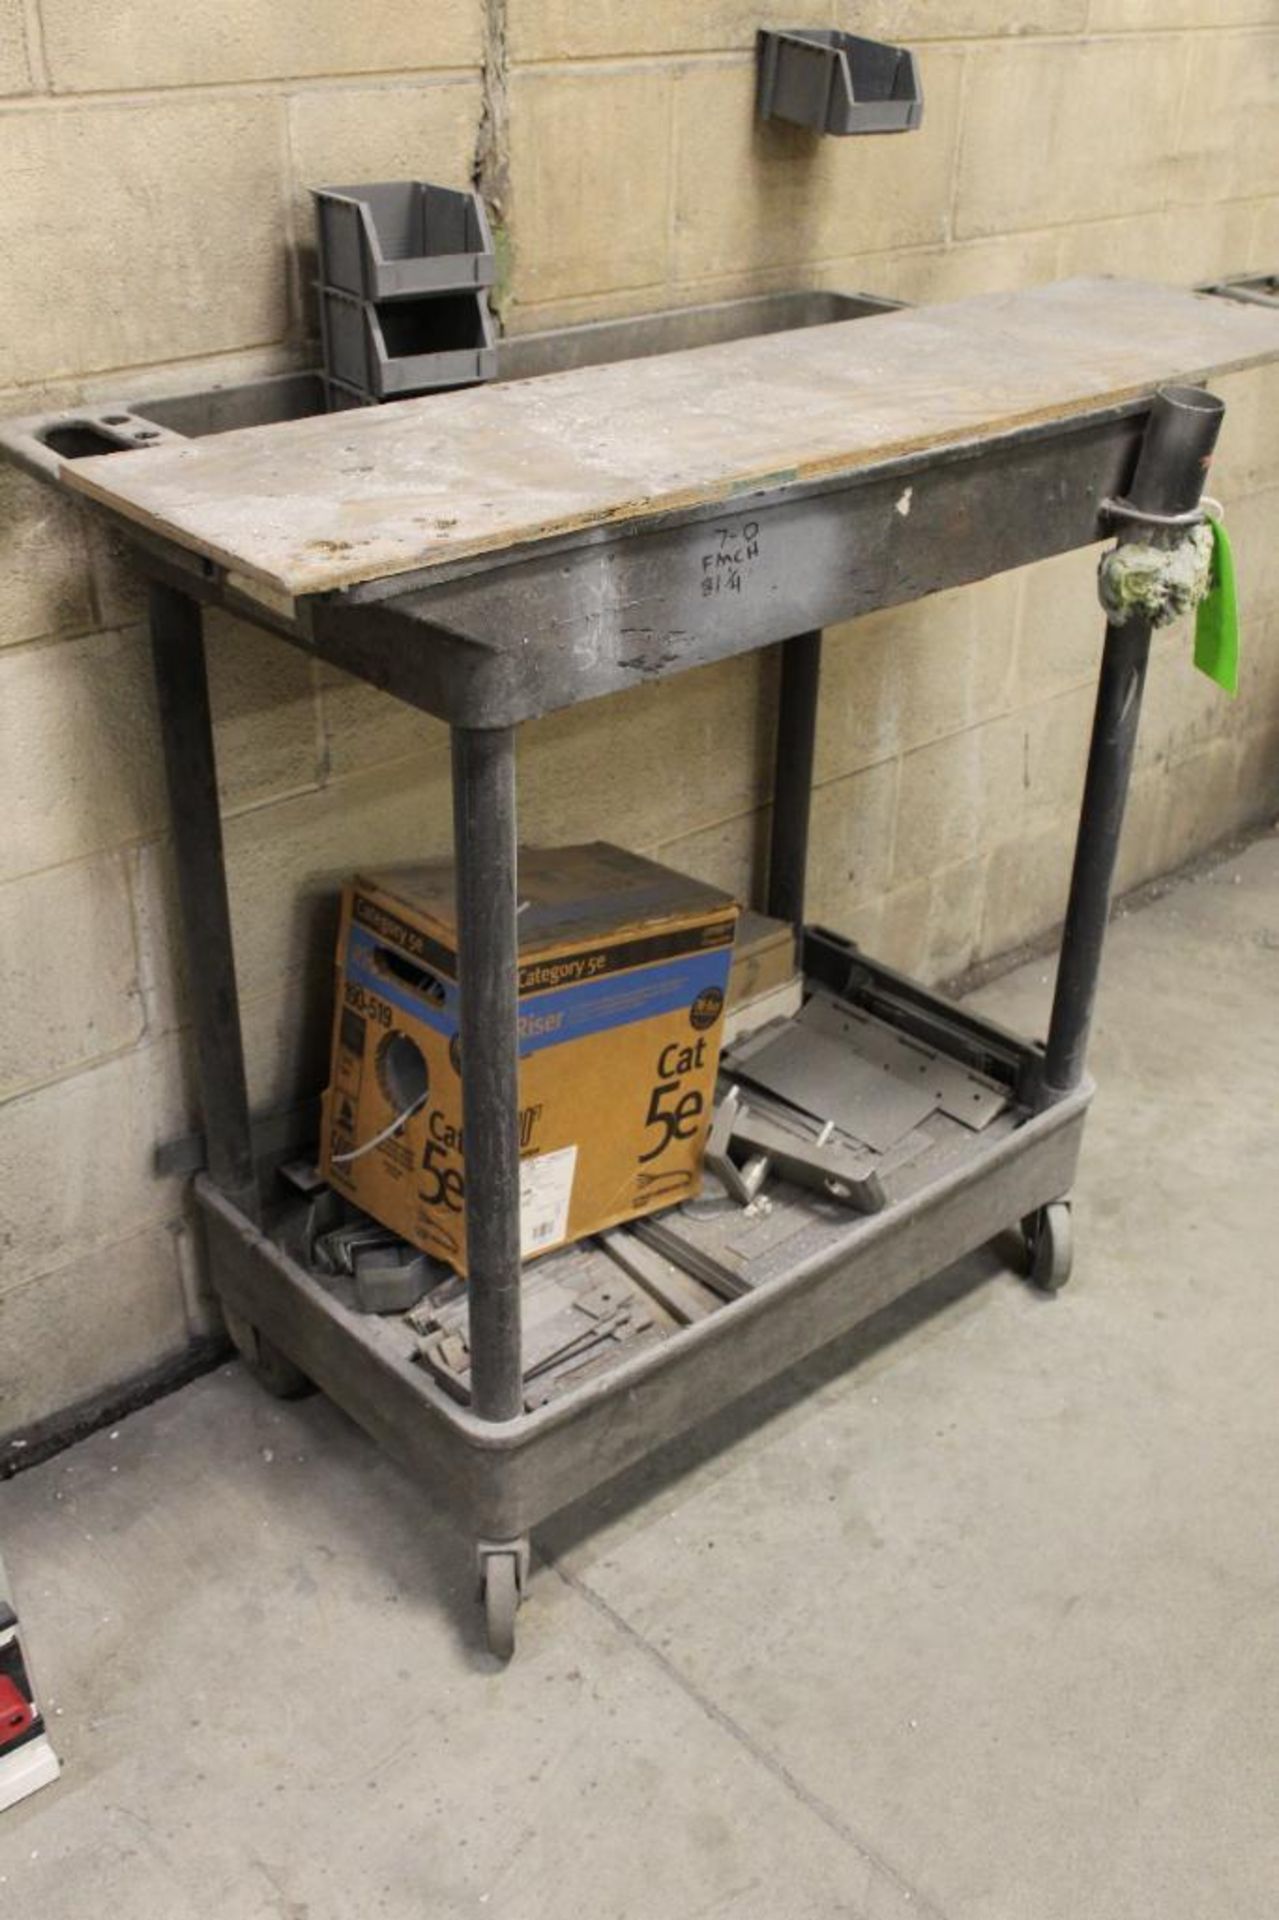 Shop Cart with Misc. Steel Contents - Image 2 of 3